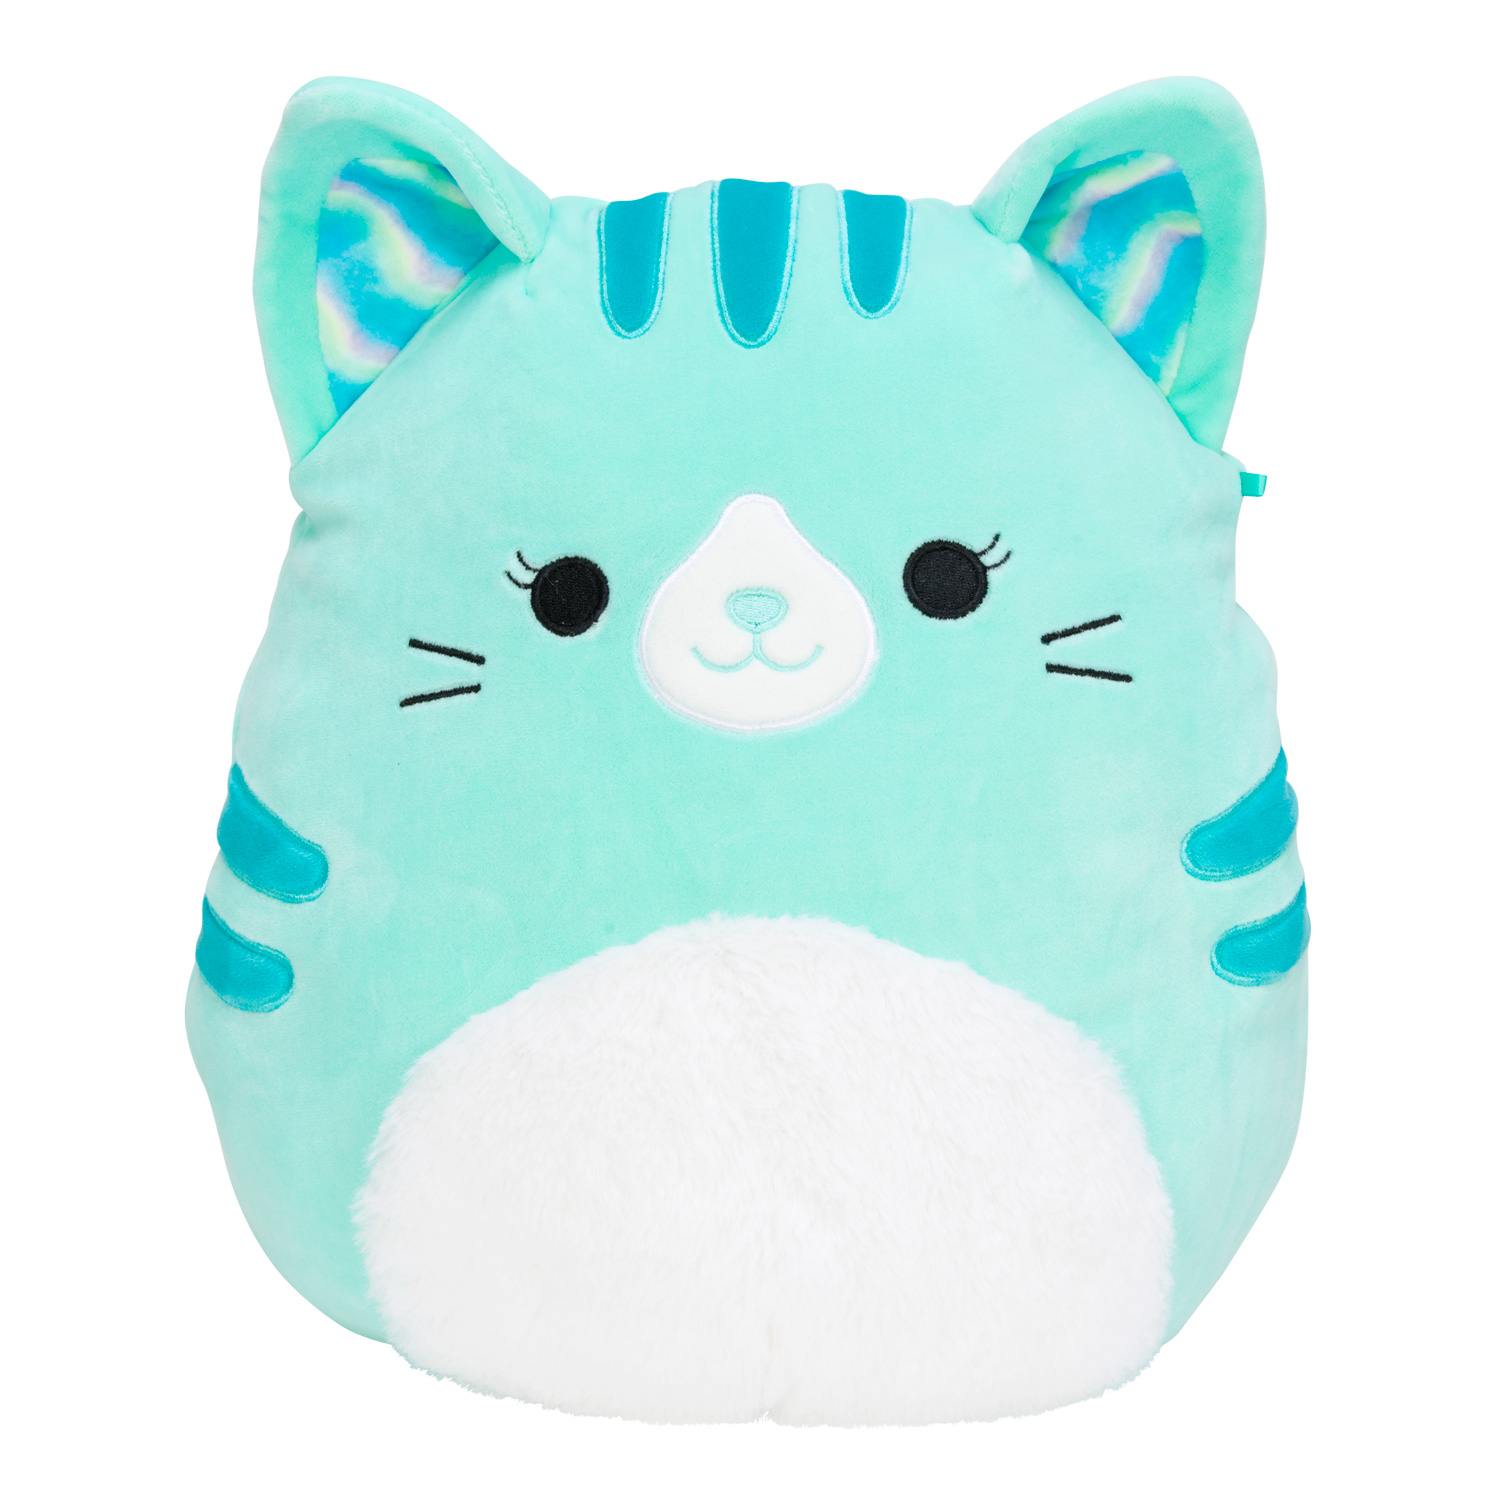 Squishmallows Knuffel Pluche - Teal Tabby Cat, 30cm